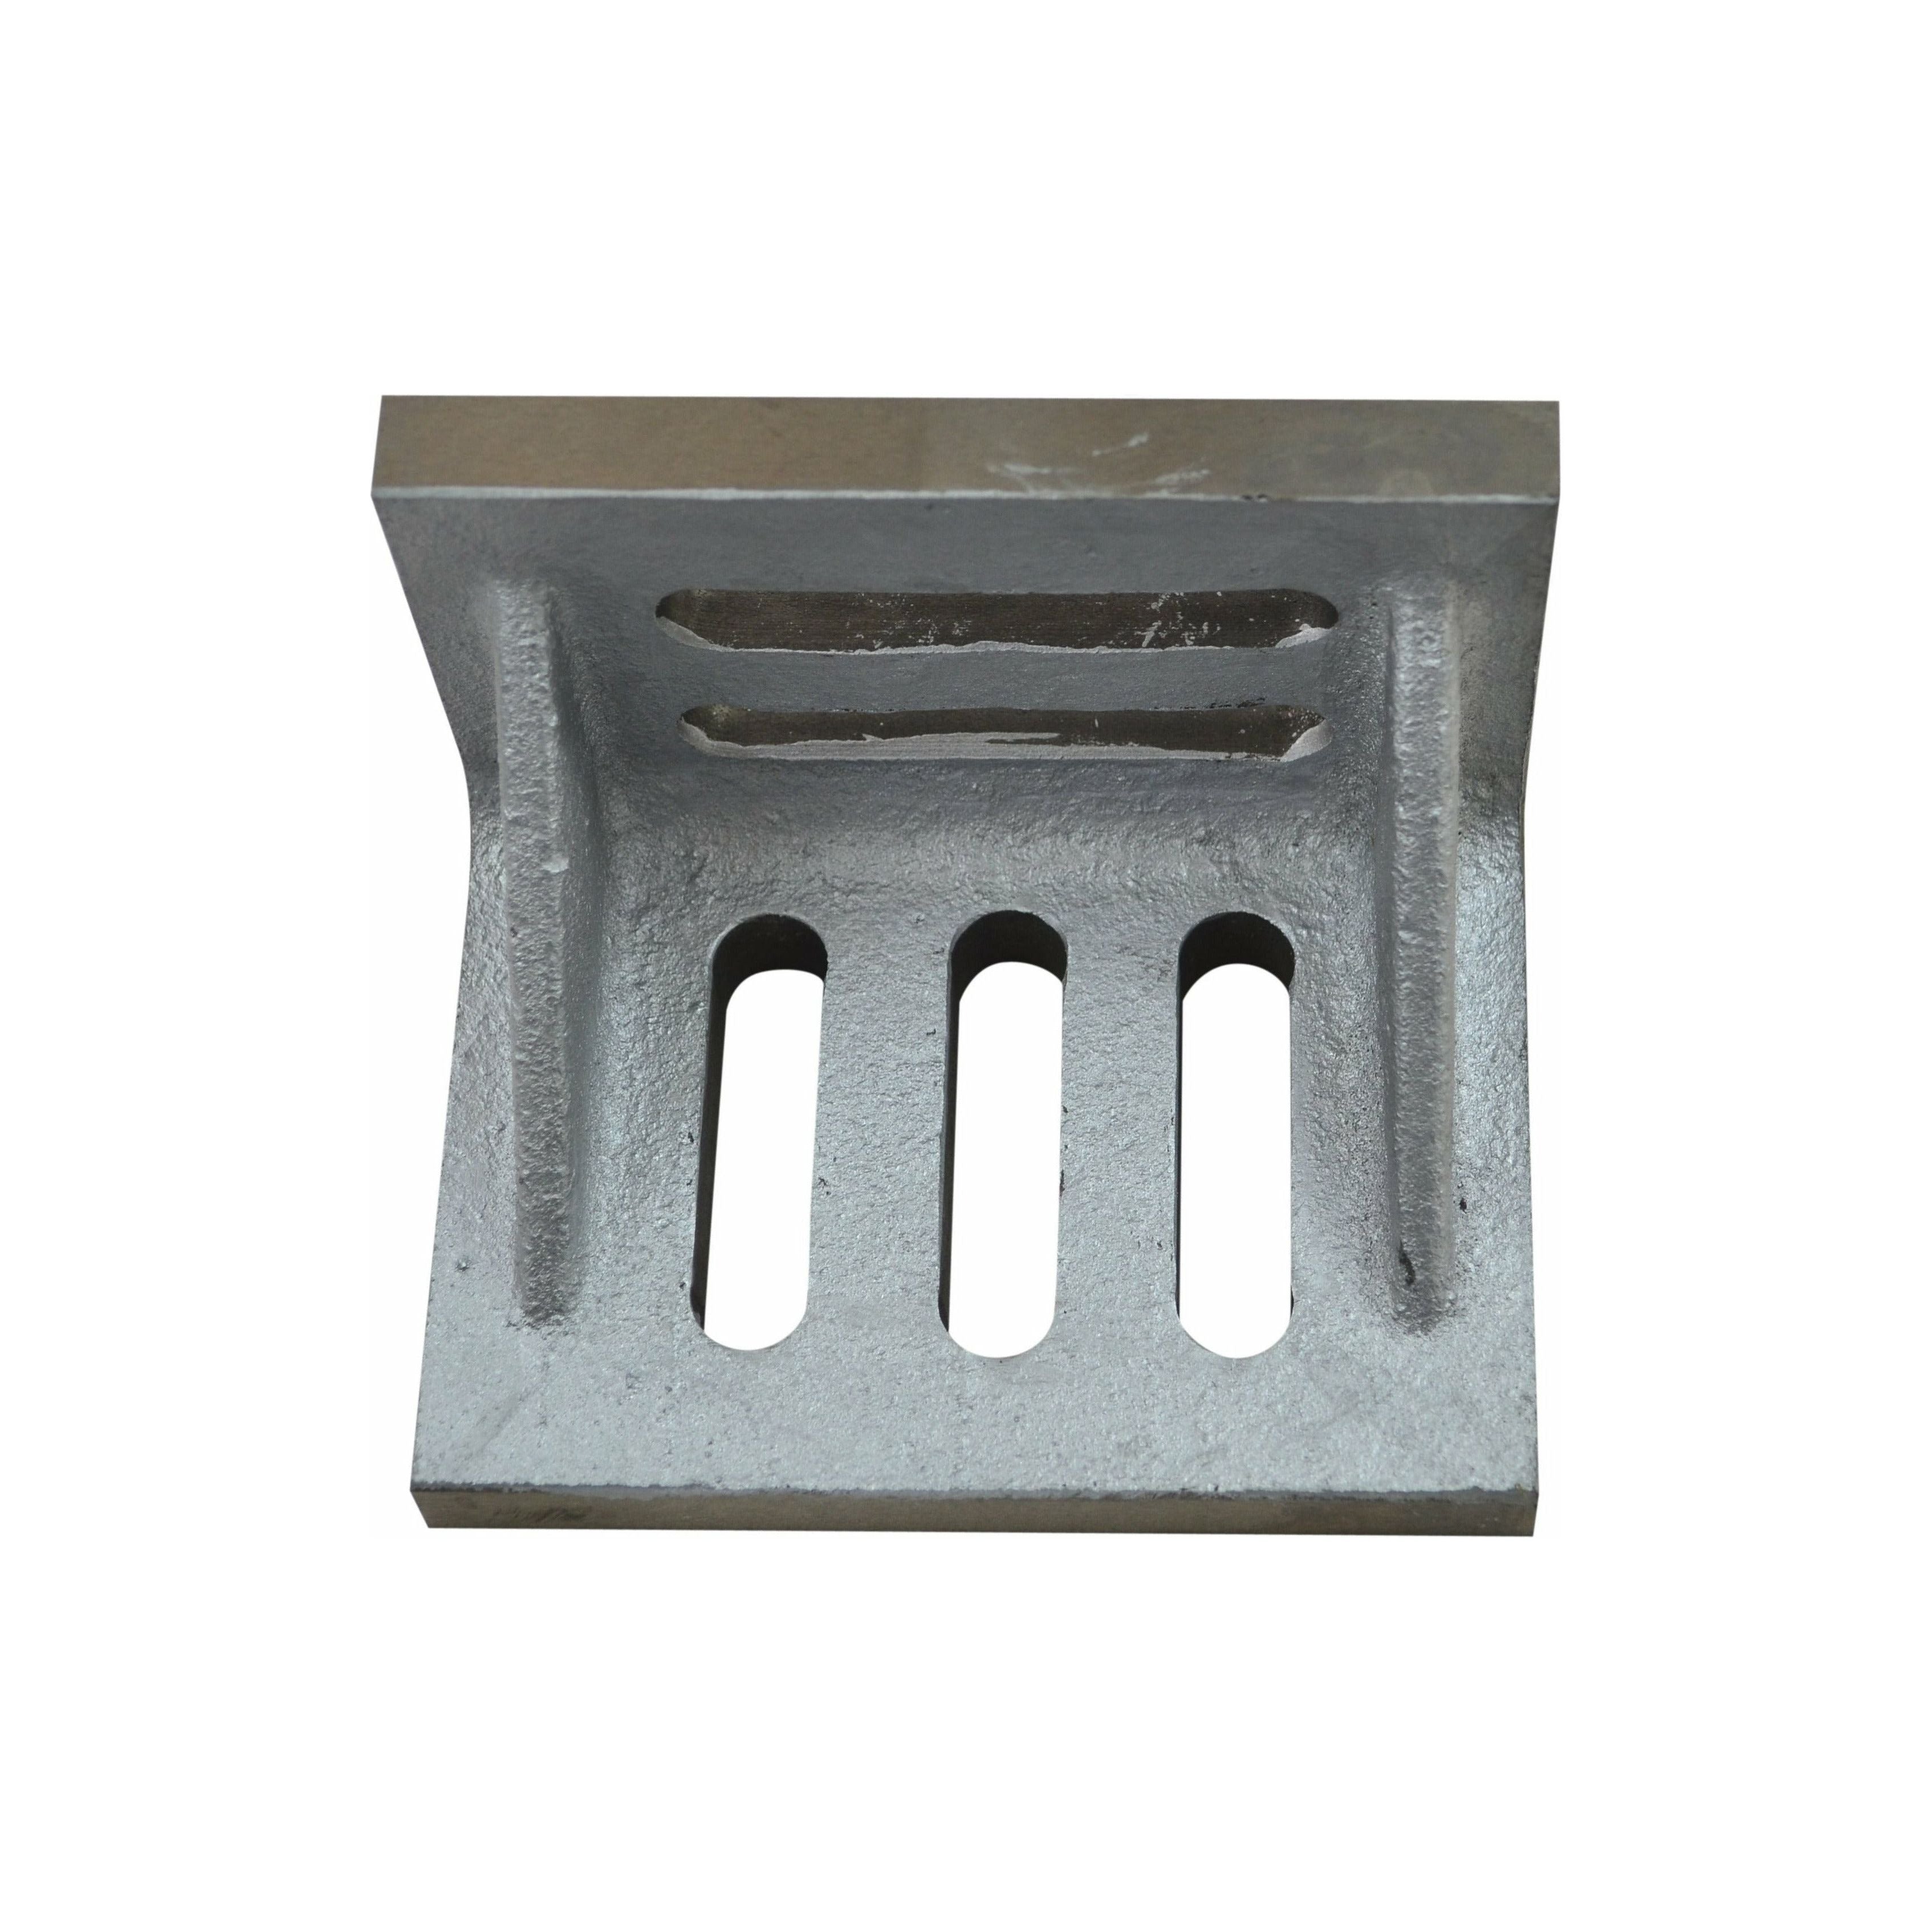 cast iron angle plate 4.5"x3.5"x3" precision tool machining milling cnc measurement metalwork 